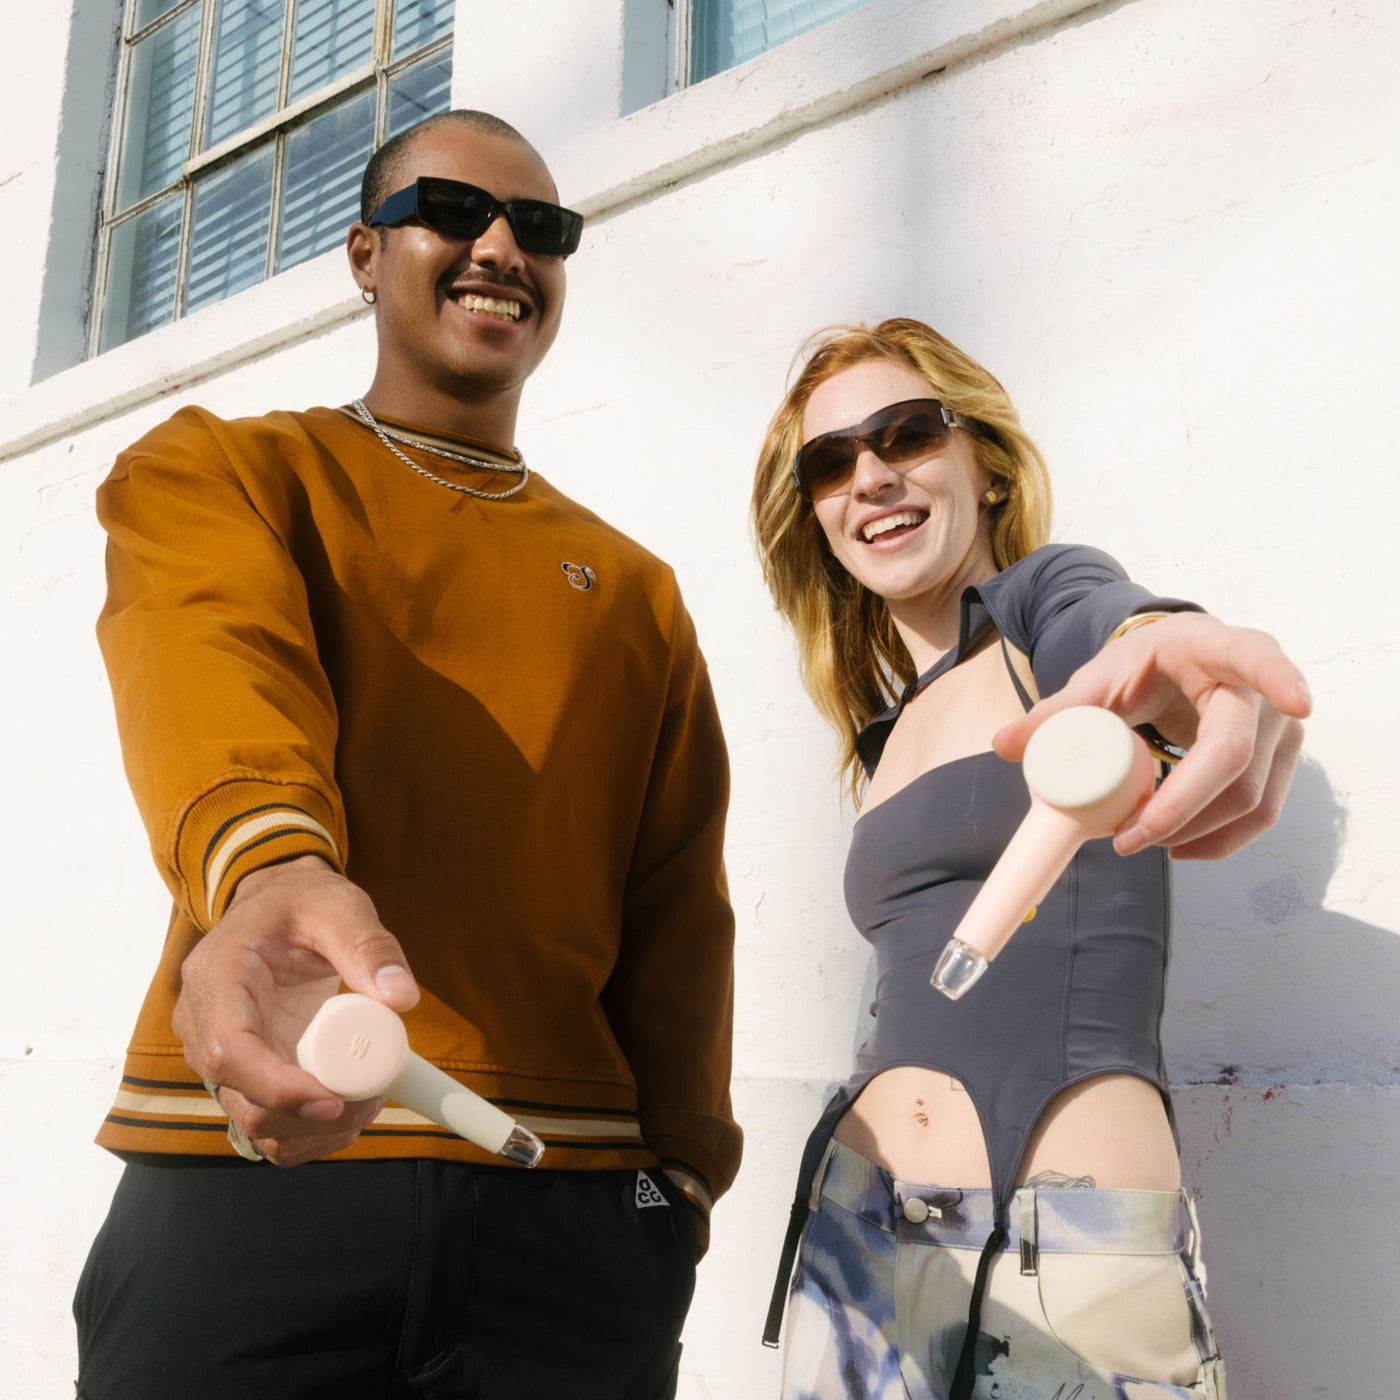 Two person smiling while showing their modular spoon pipe in front of a white wall. It shows the customization feature of the smoke gray hand pipe.